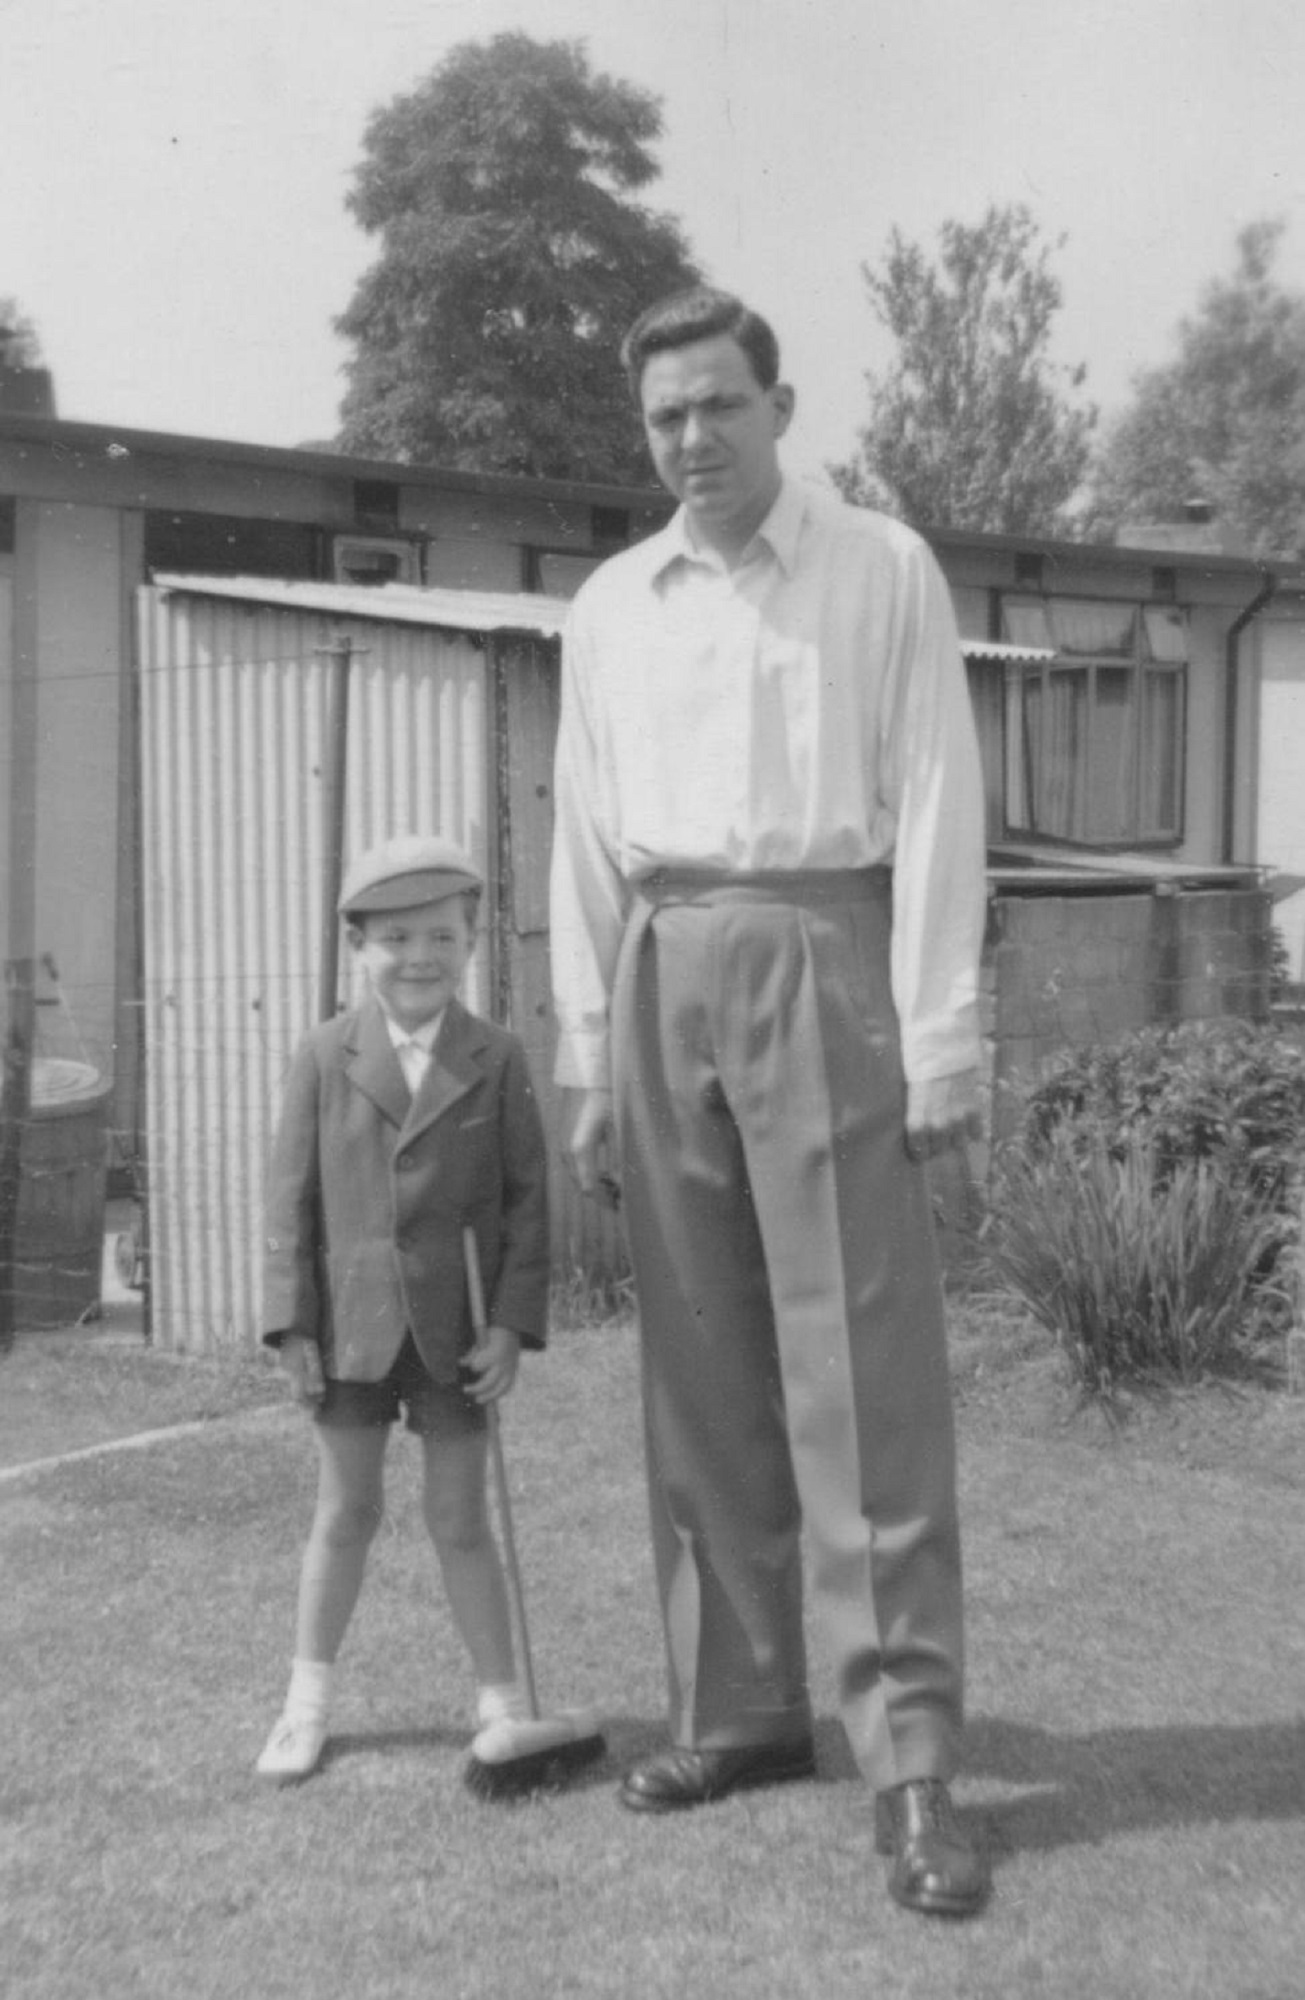 Robert Anthony Allison and my father Robert Frederick Allison. Kendal Road, London NW10